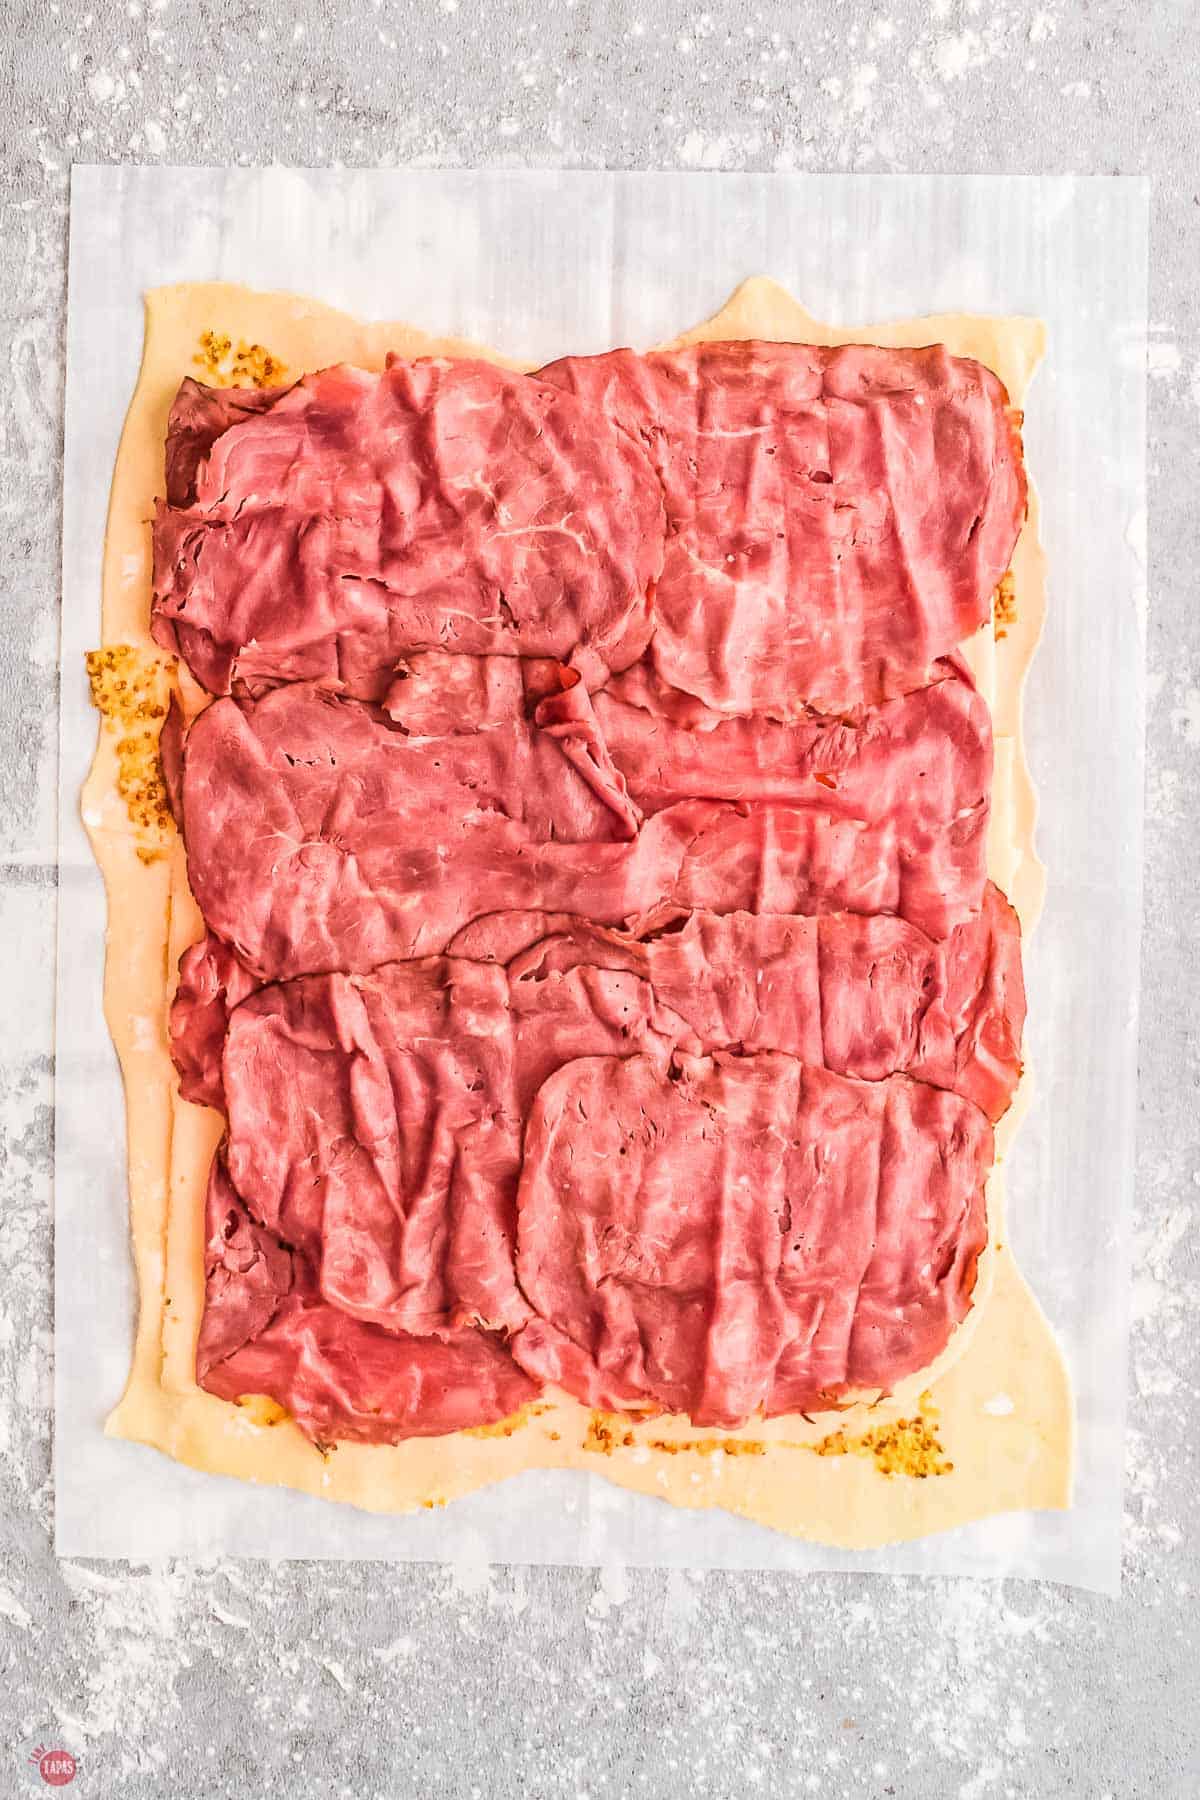 sliced corned beef on puff pastry is my new favorite sandwich